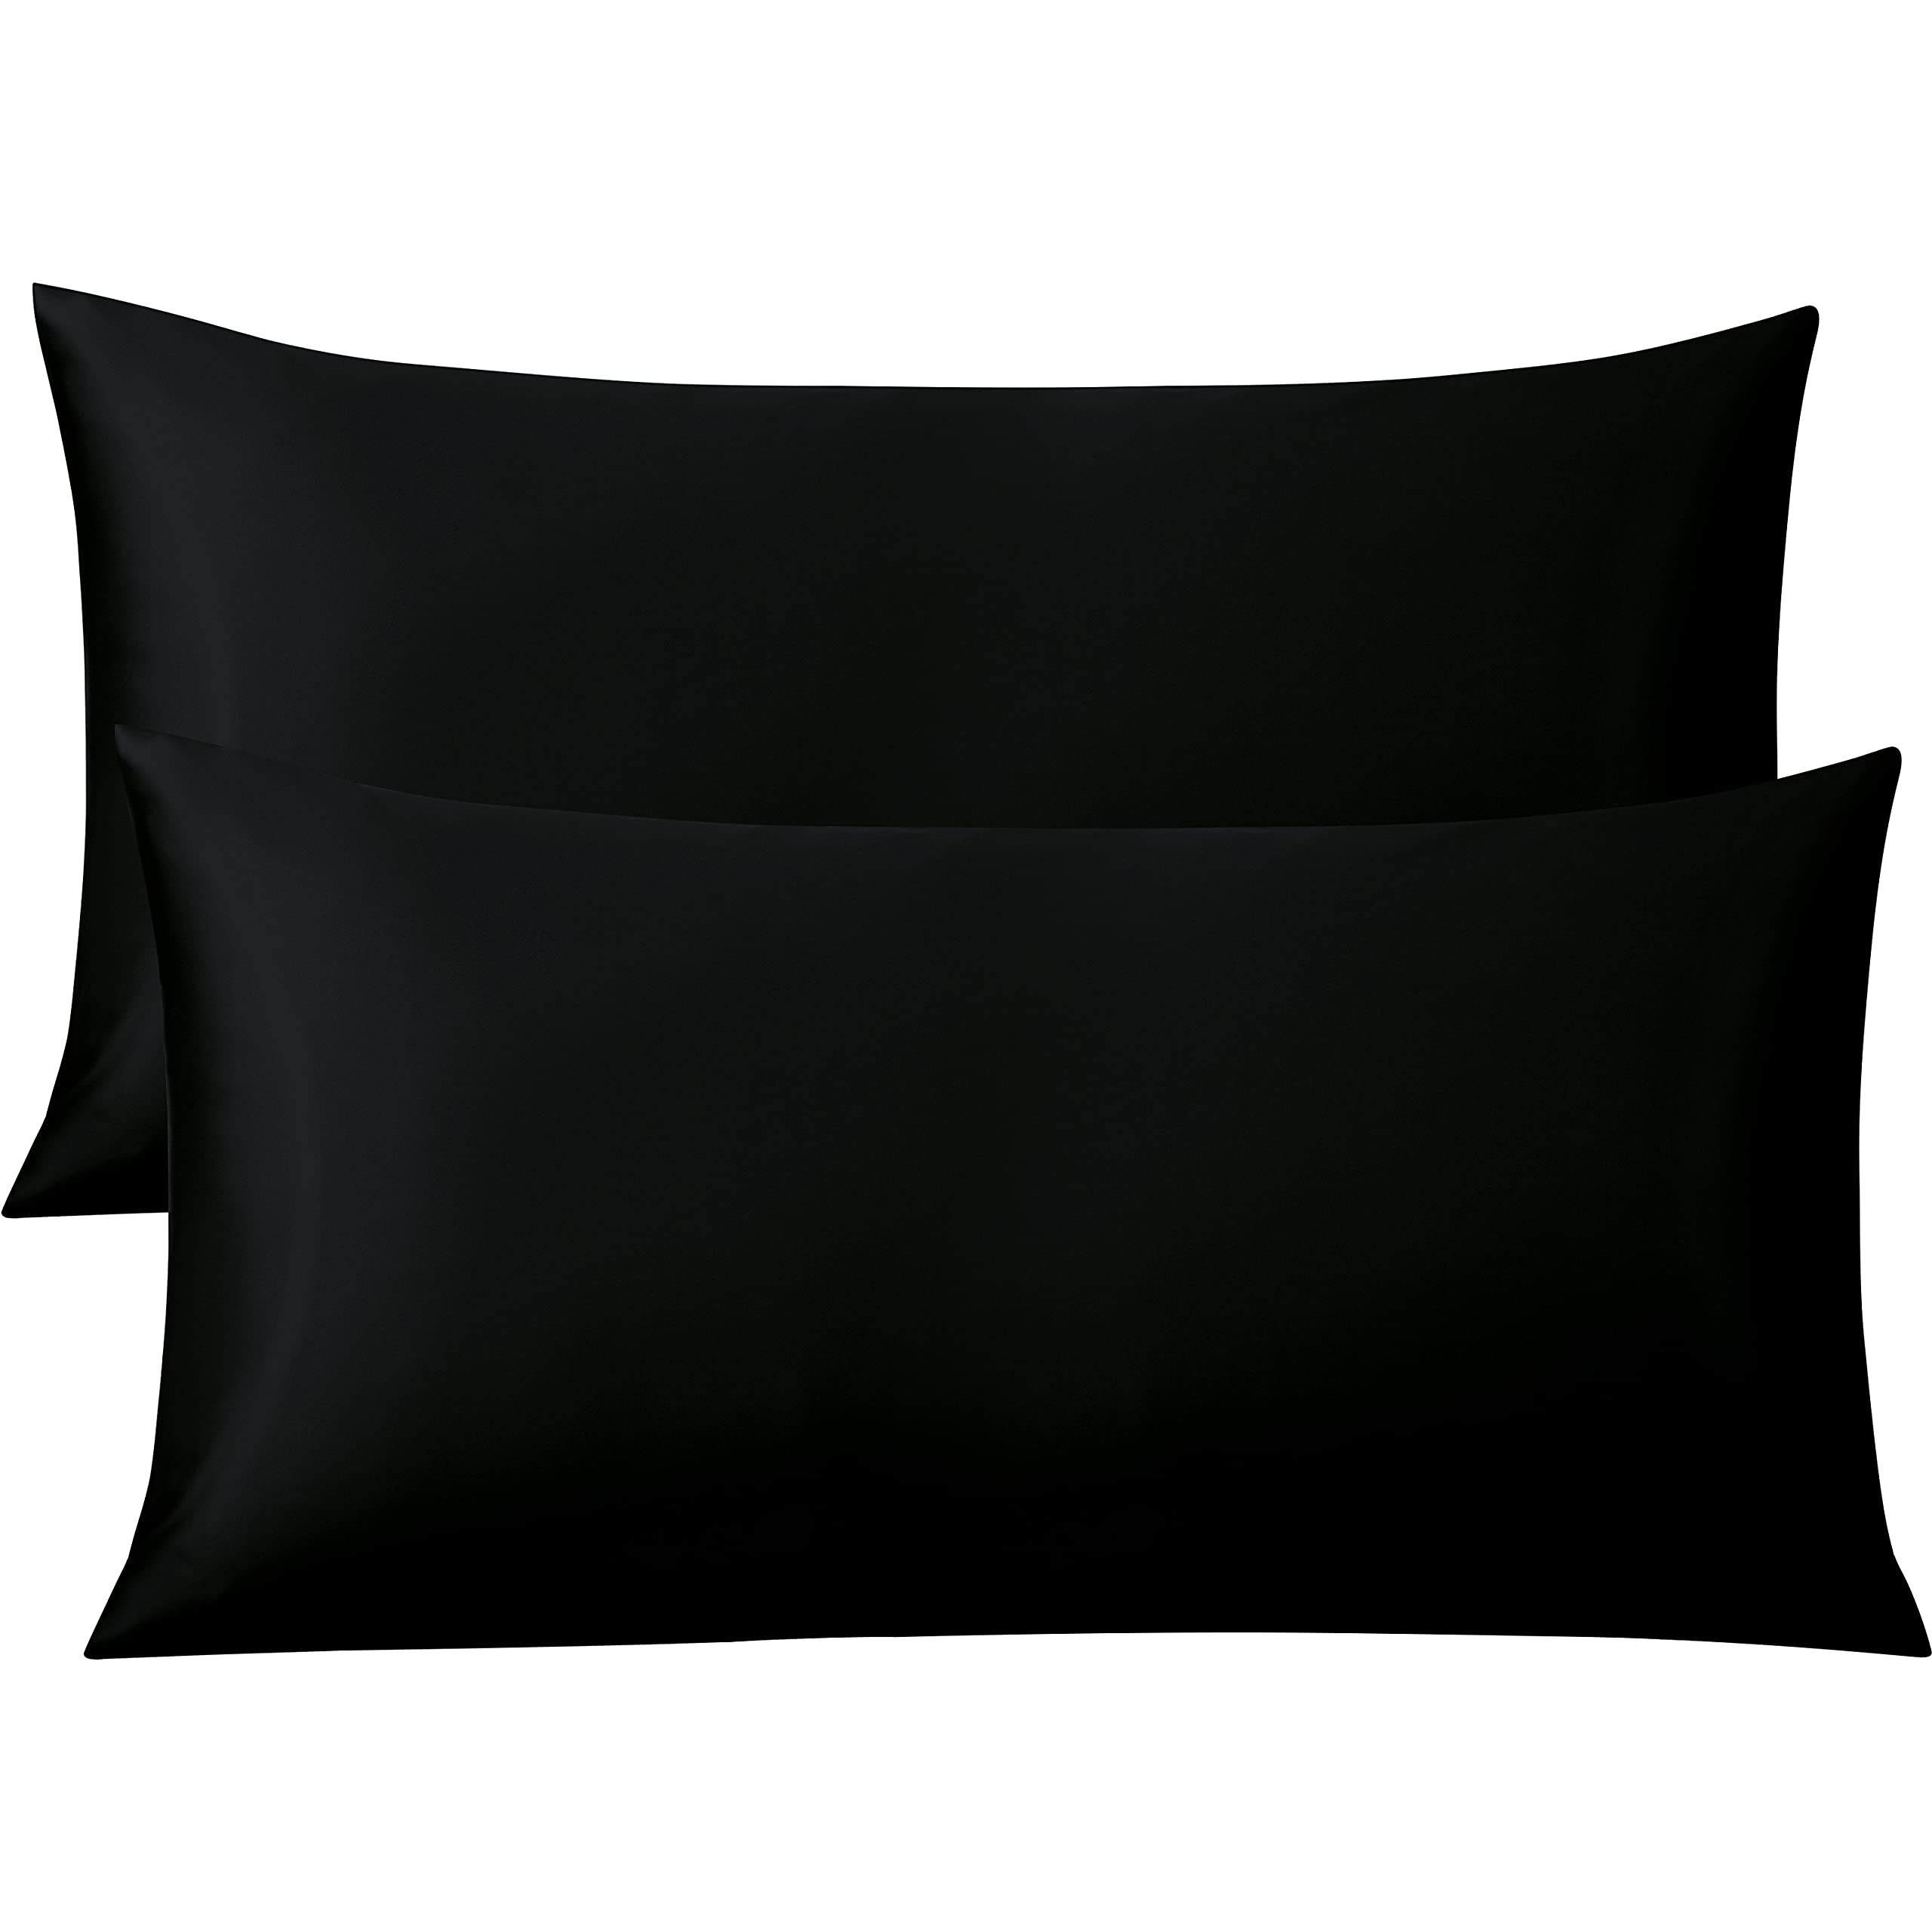 FLXXIE 500 Thread Count Egyptian Cotton Pillowcases, Super Cozy and Breathable King Pillow Cases with Envelope Closure, 50 x 90 cm, Black